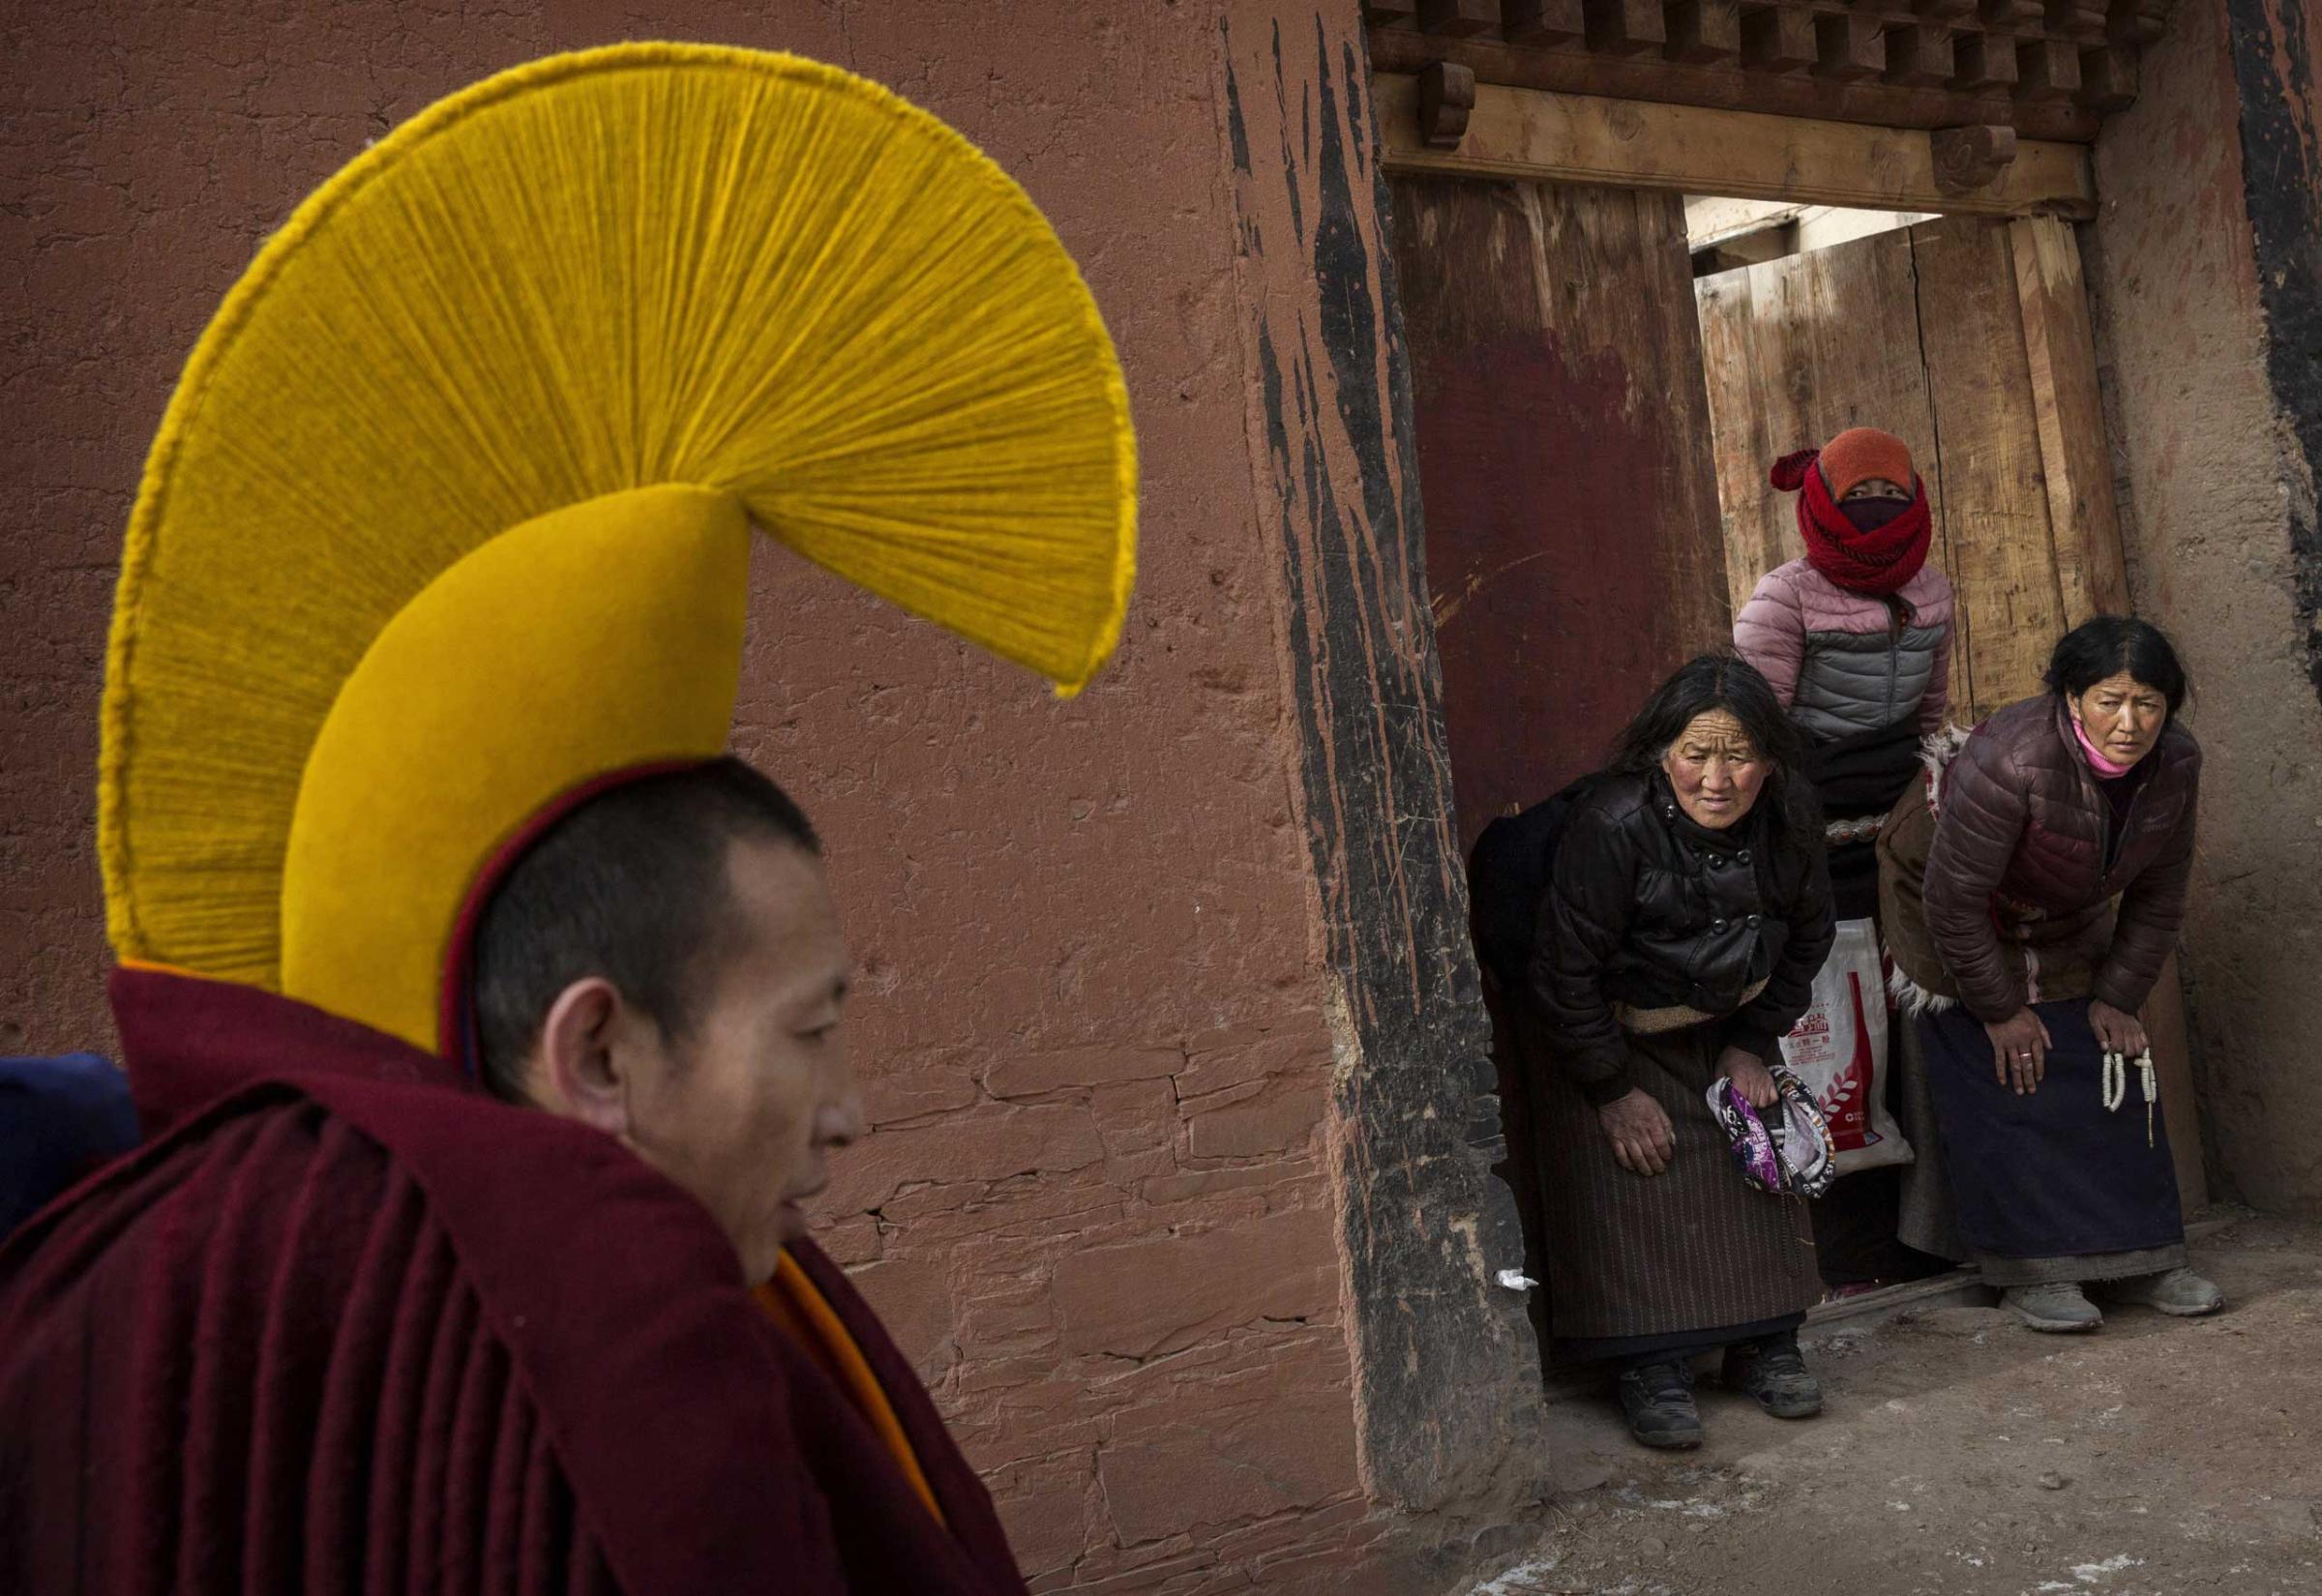 Devotees bow to a passingTibetan Buddhist monk on his way to take part in a special prayer during Monlam or the Great Prayer rituals on March 5, 2015 at the Labrang Monastery.